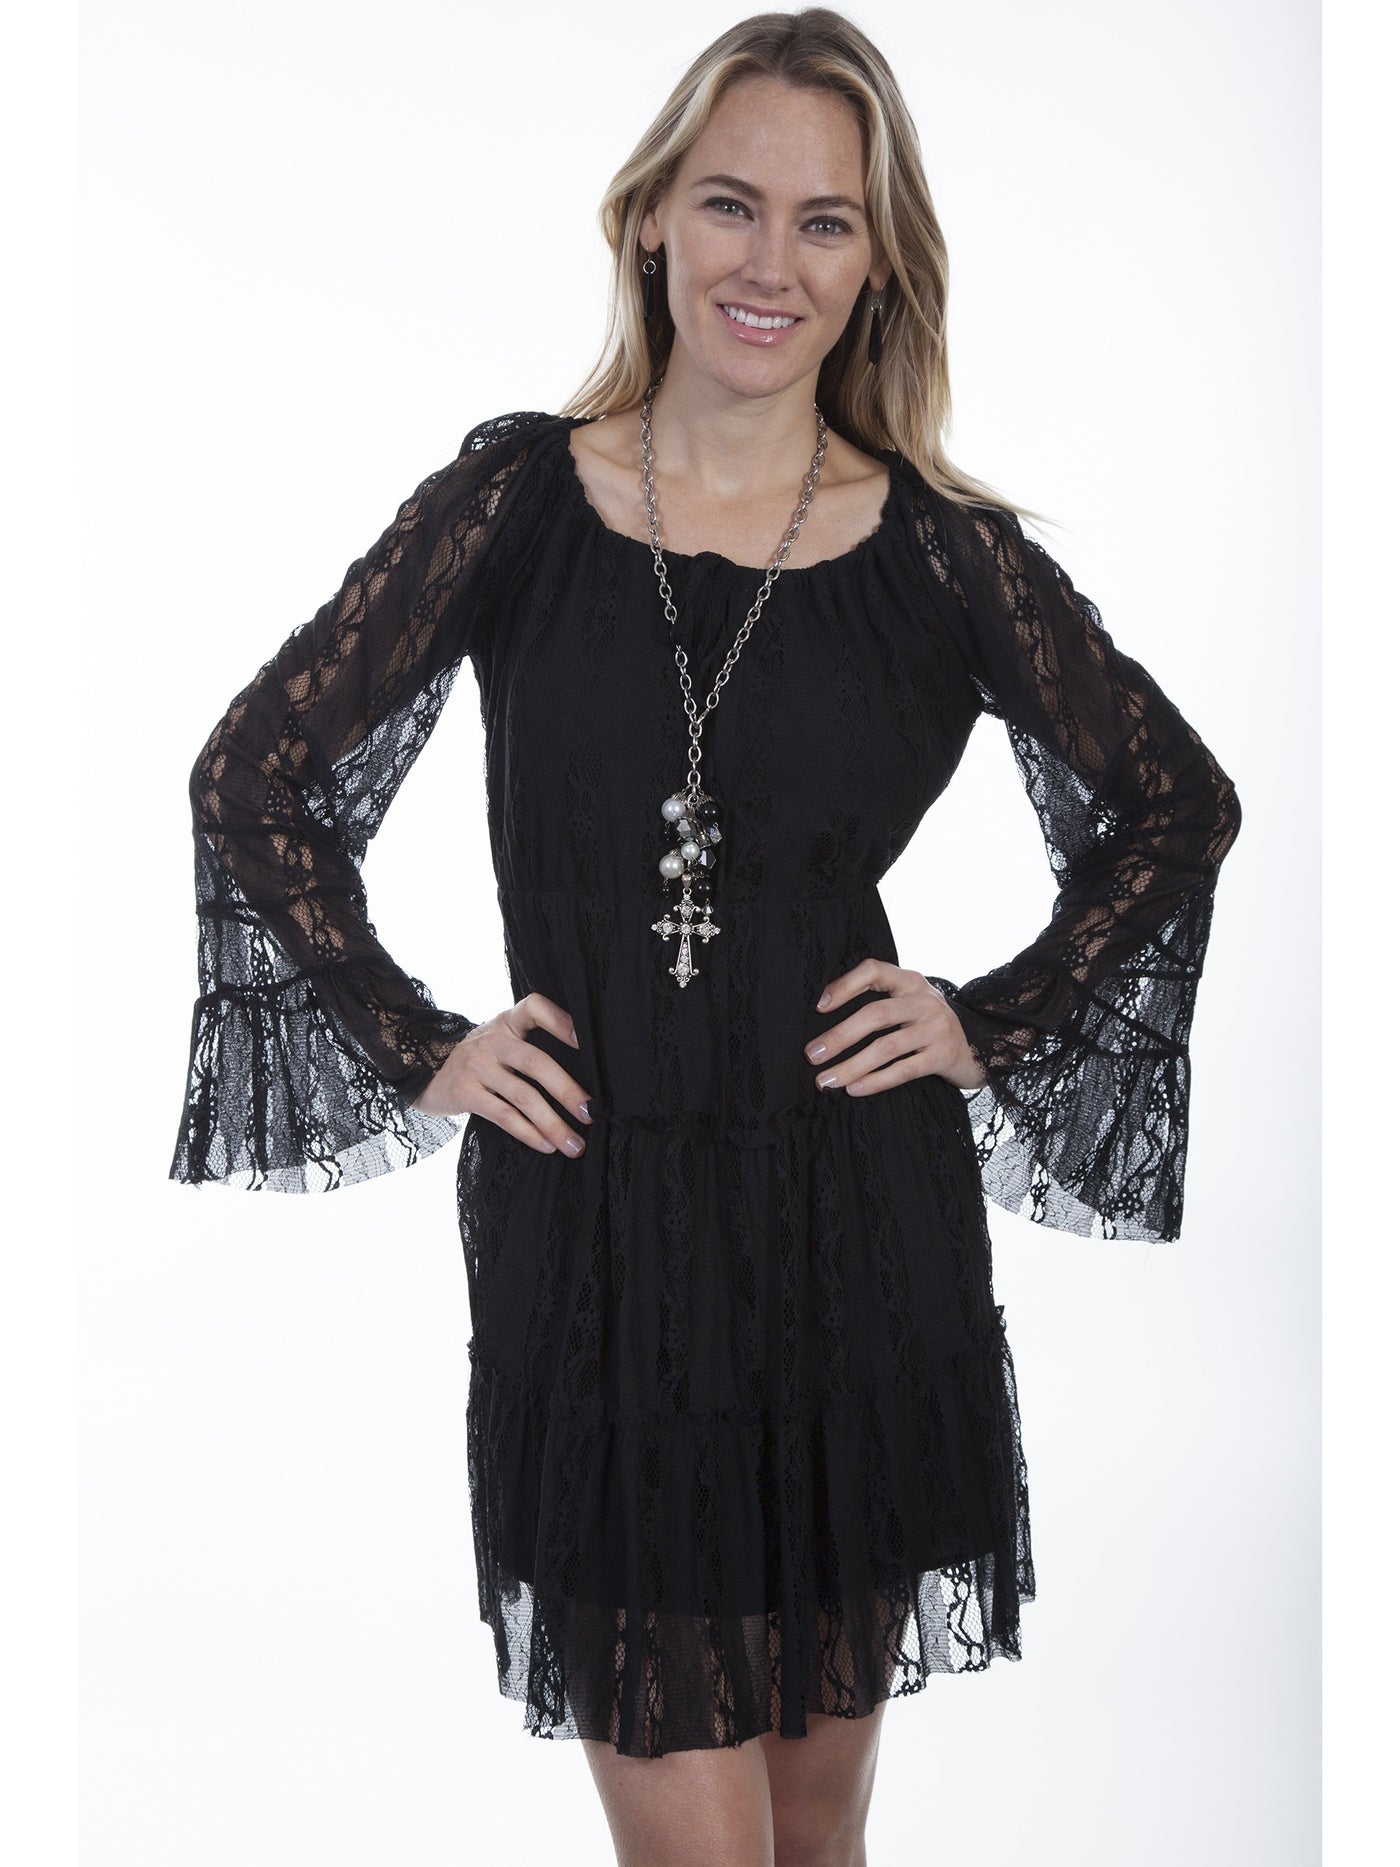 Saddle Up Sweet Cowgirl Dress in Black - SOLD OUT